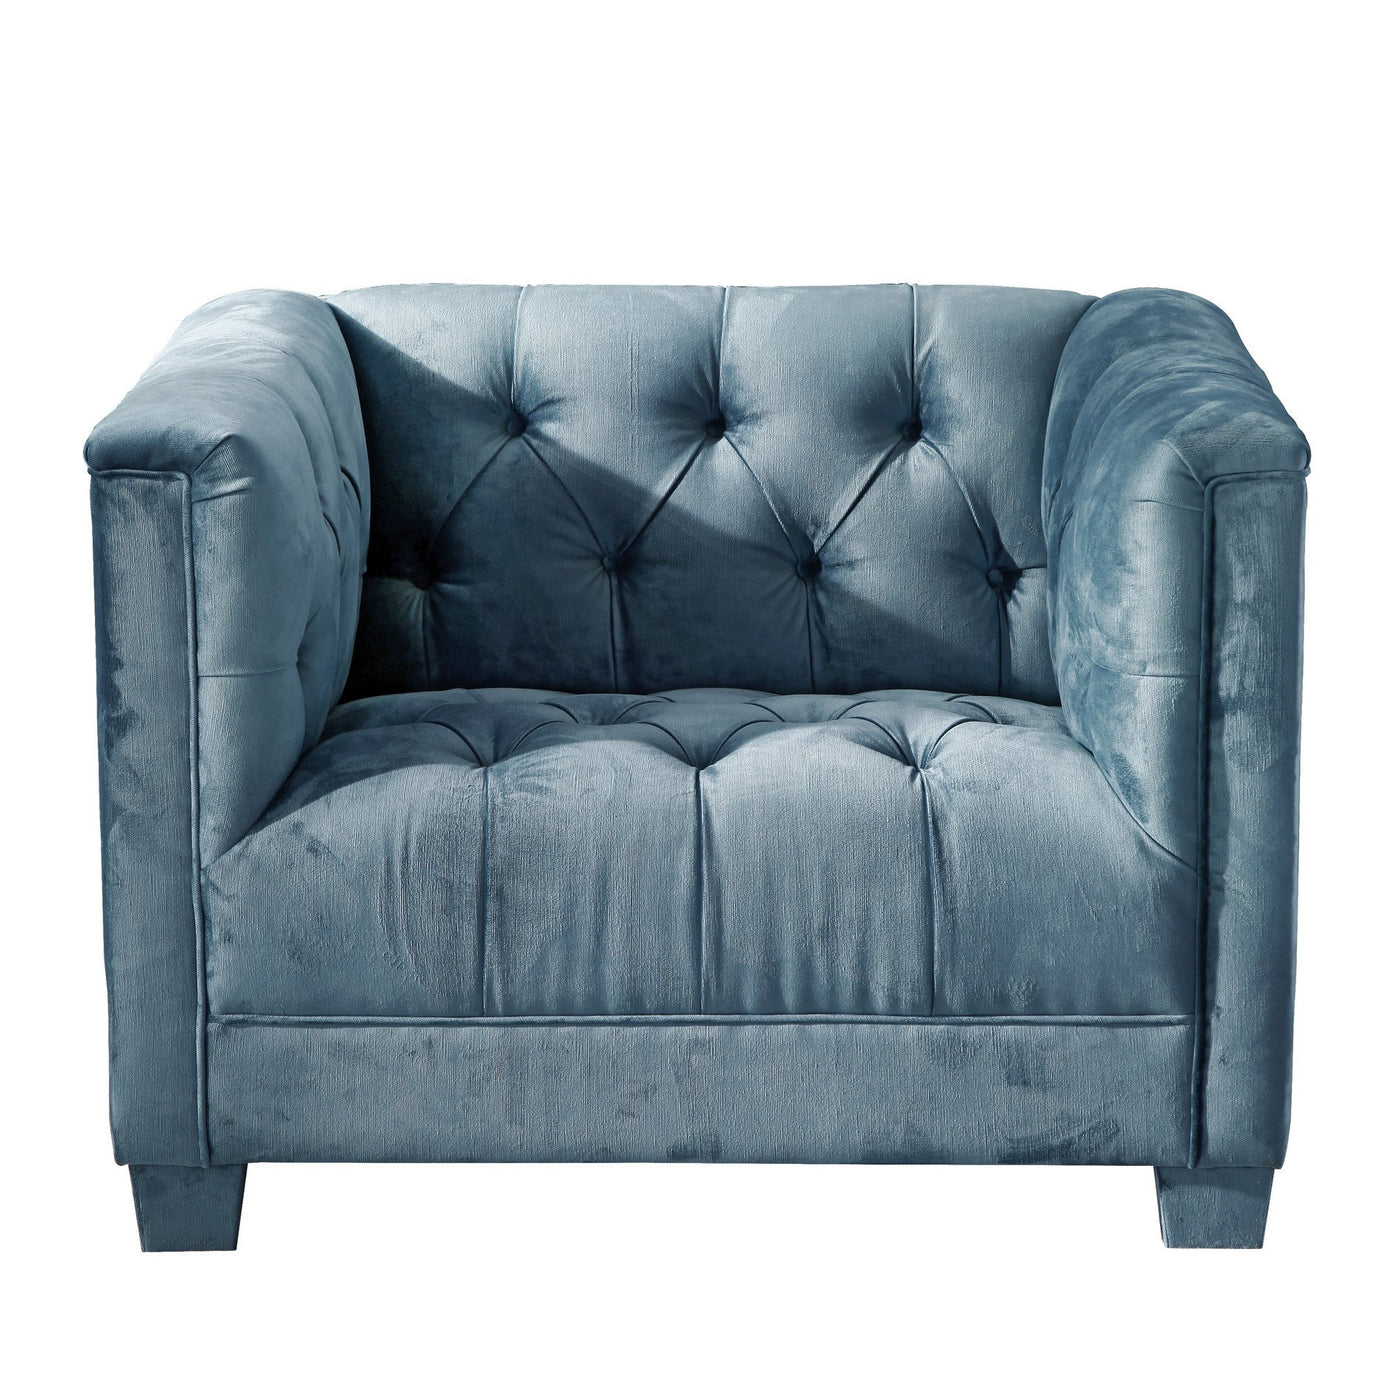 Luxor 2 Seater Teal